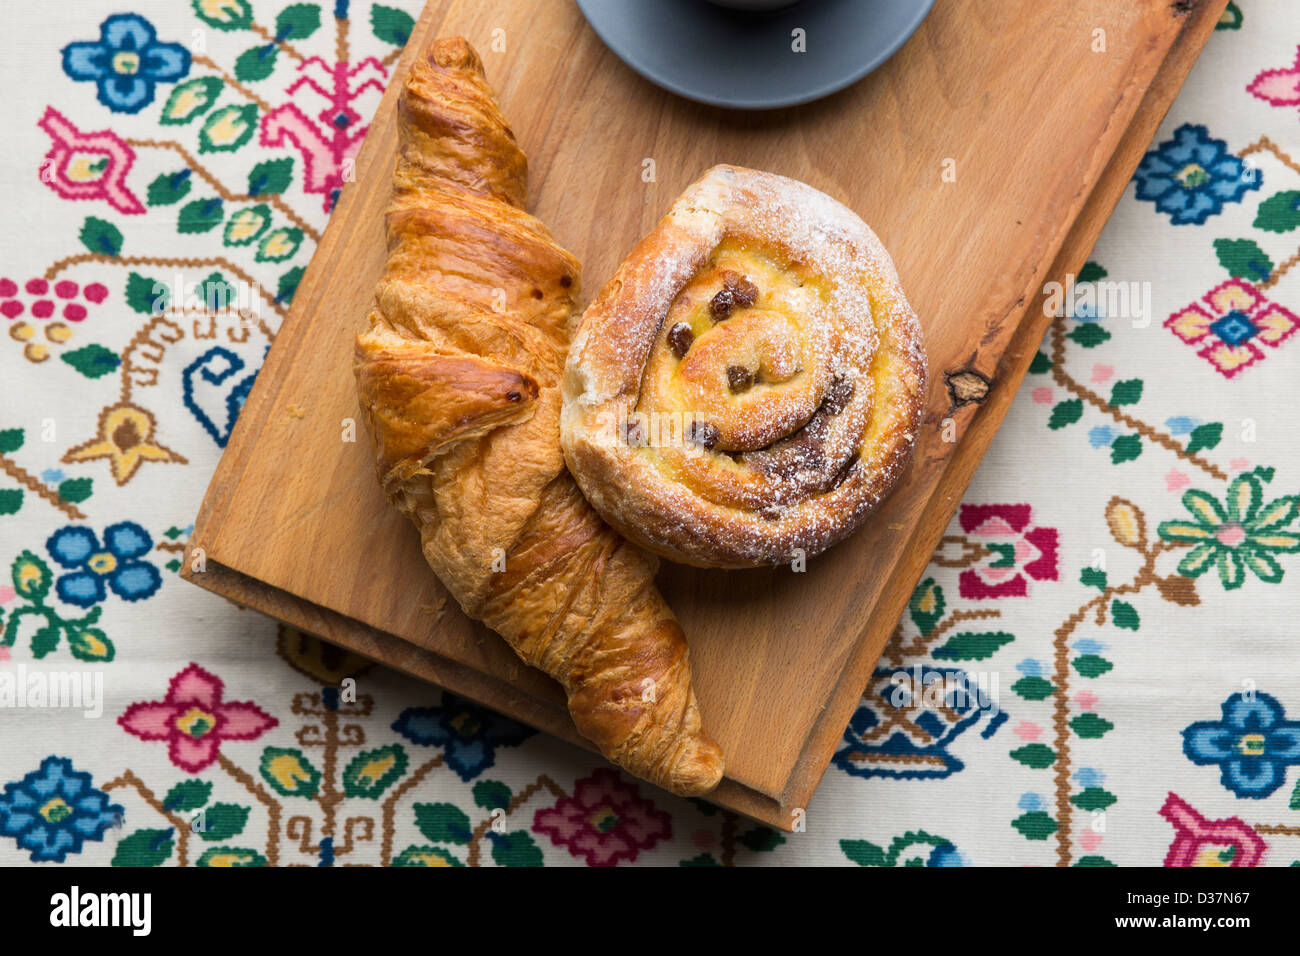 Pastries and coffee on a natural wood chopping board on Danish folk fabric lit from the top of the frame. Stock Photo